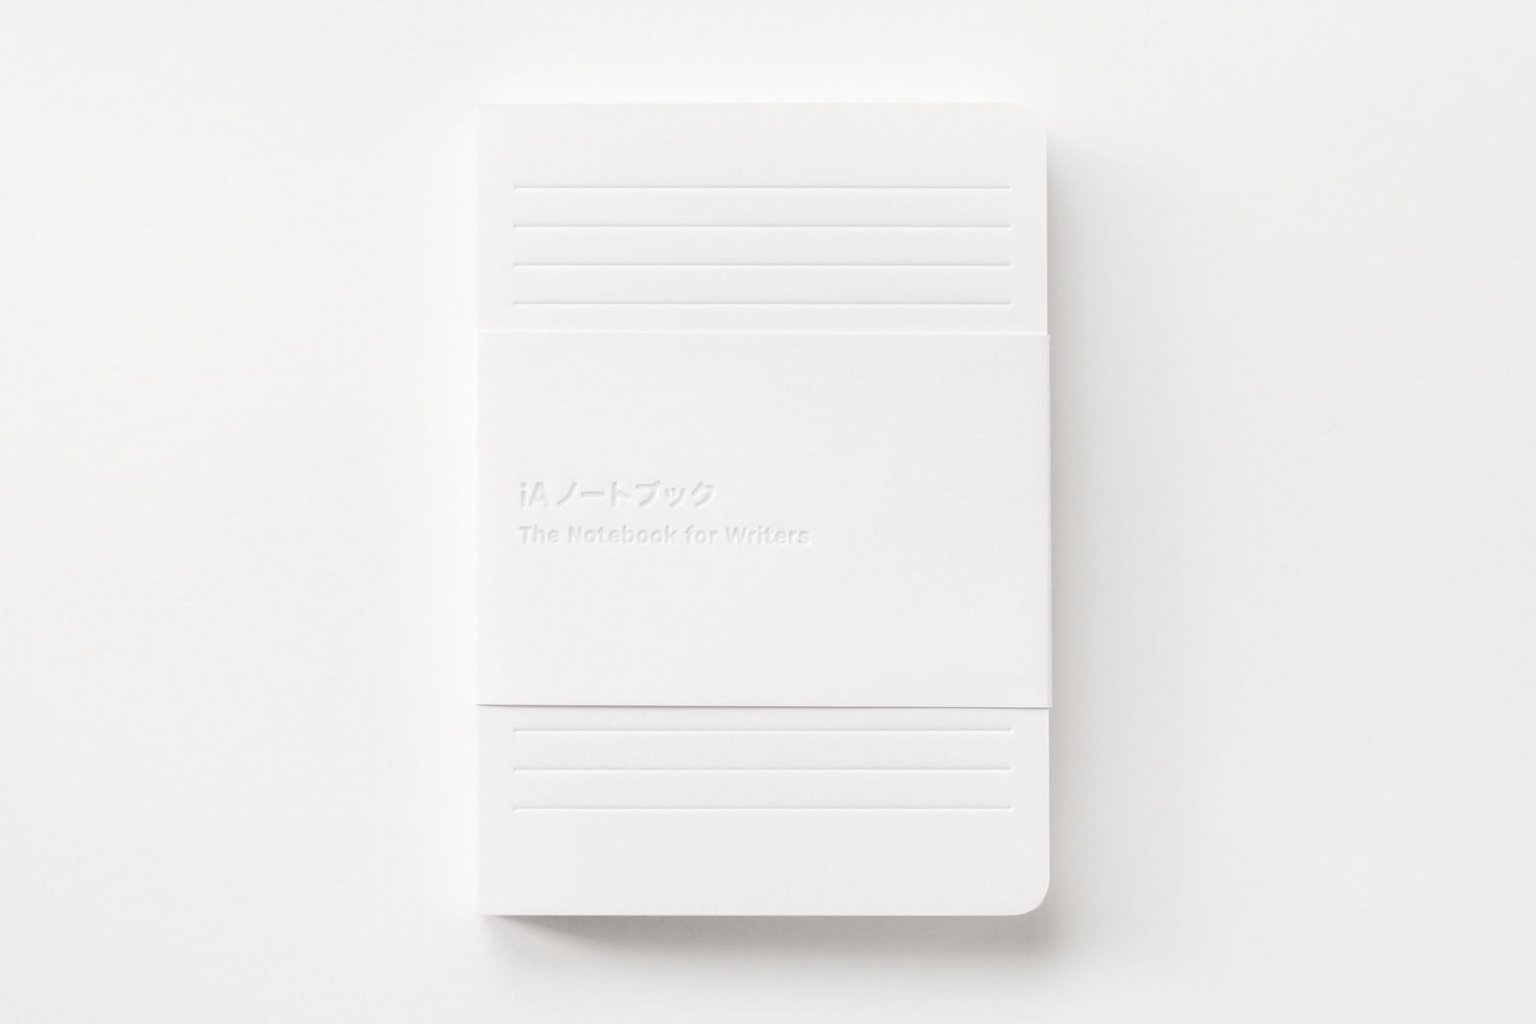 The Notebook for Writers by iA